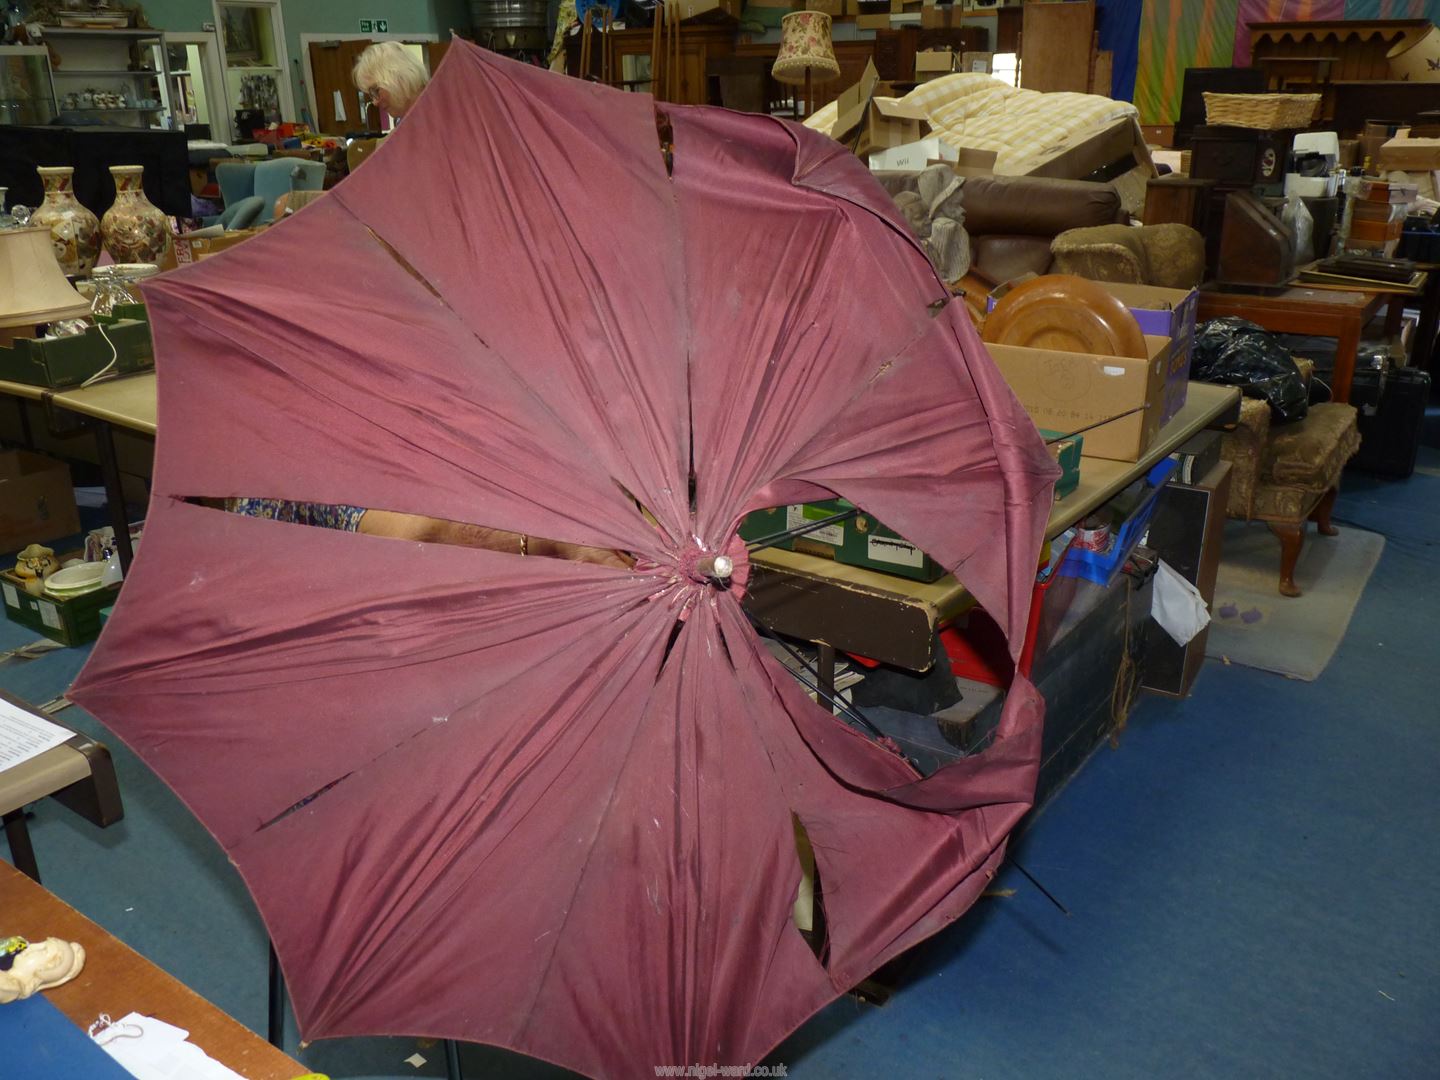 A parasol with wooden shaft and carved elephant handle plus a black umbrella with wooden shaft, - Image 7 of 7